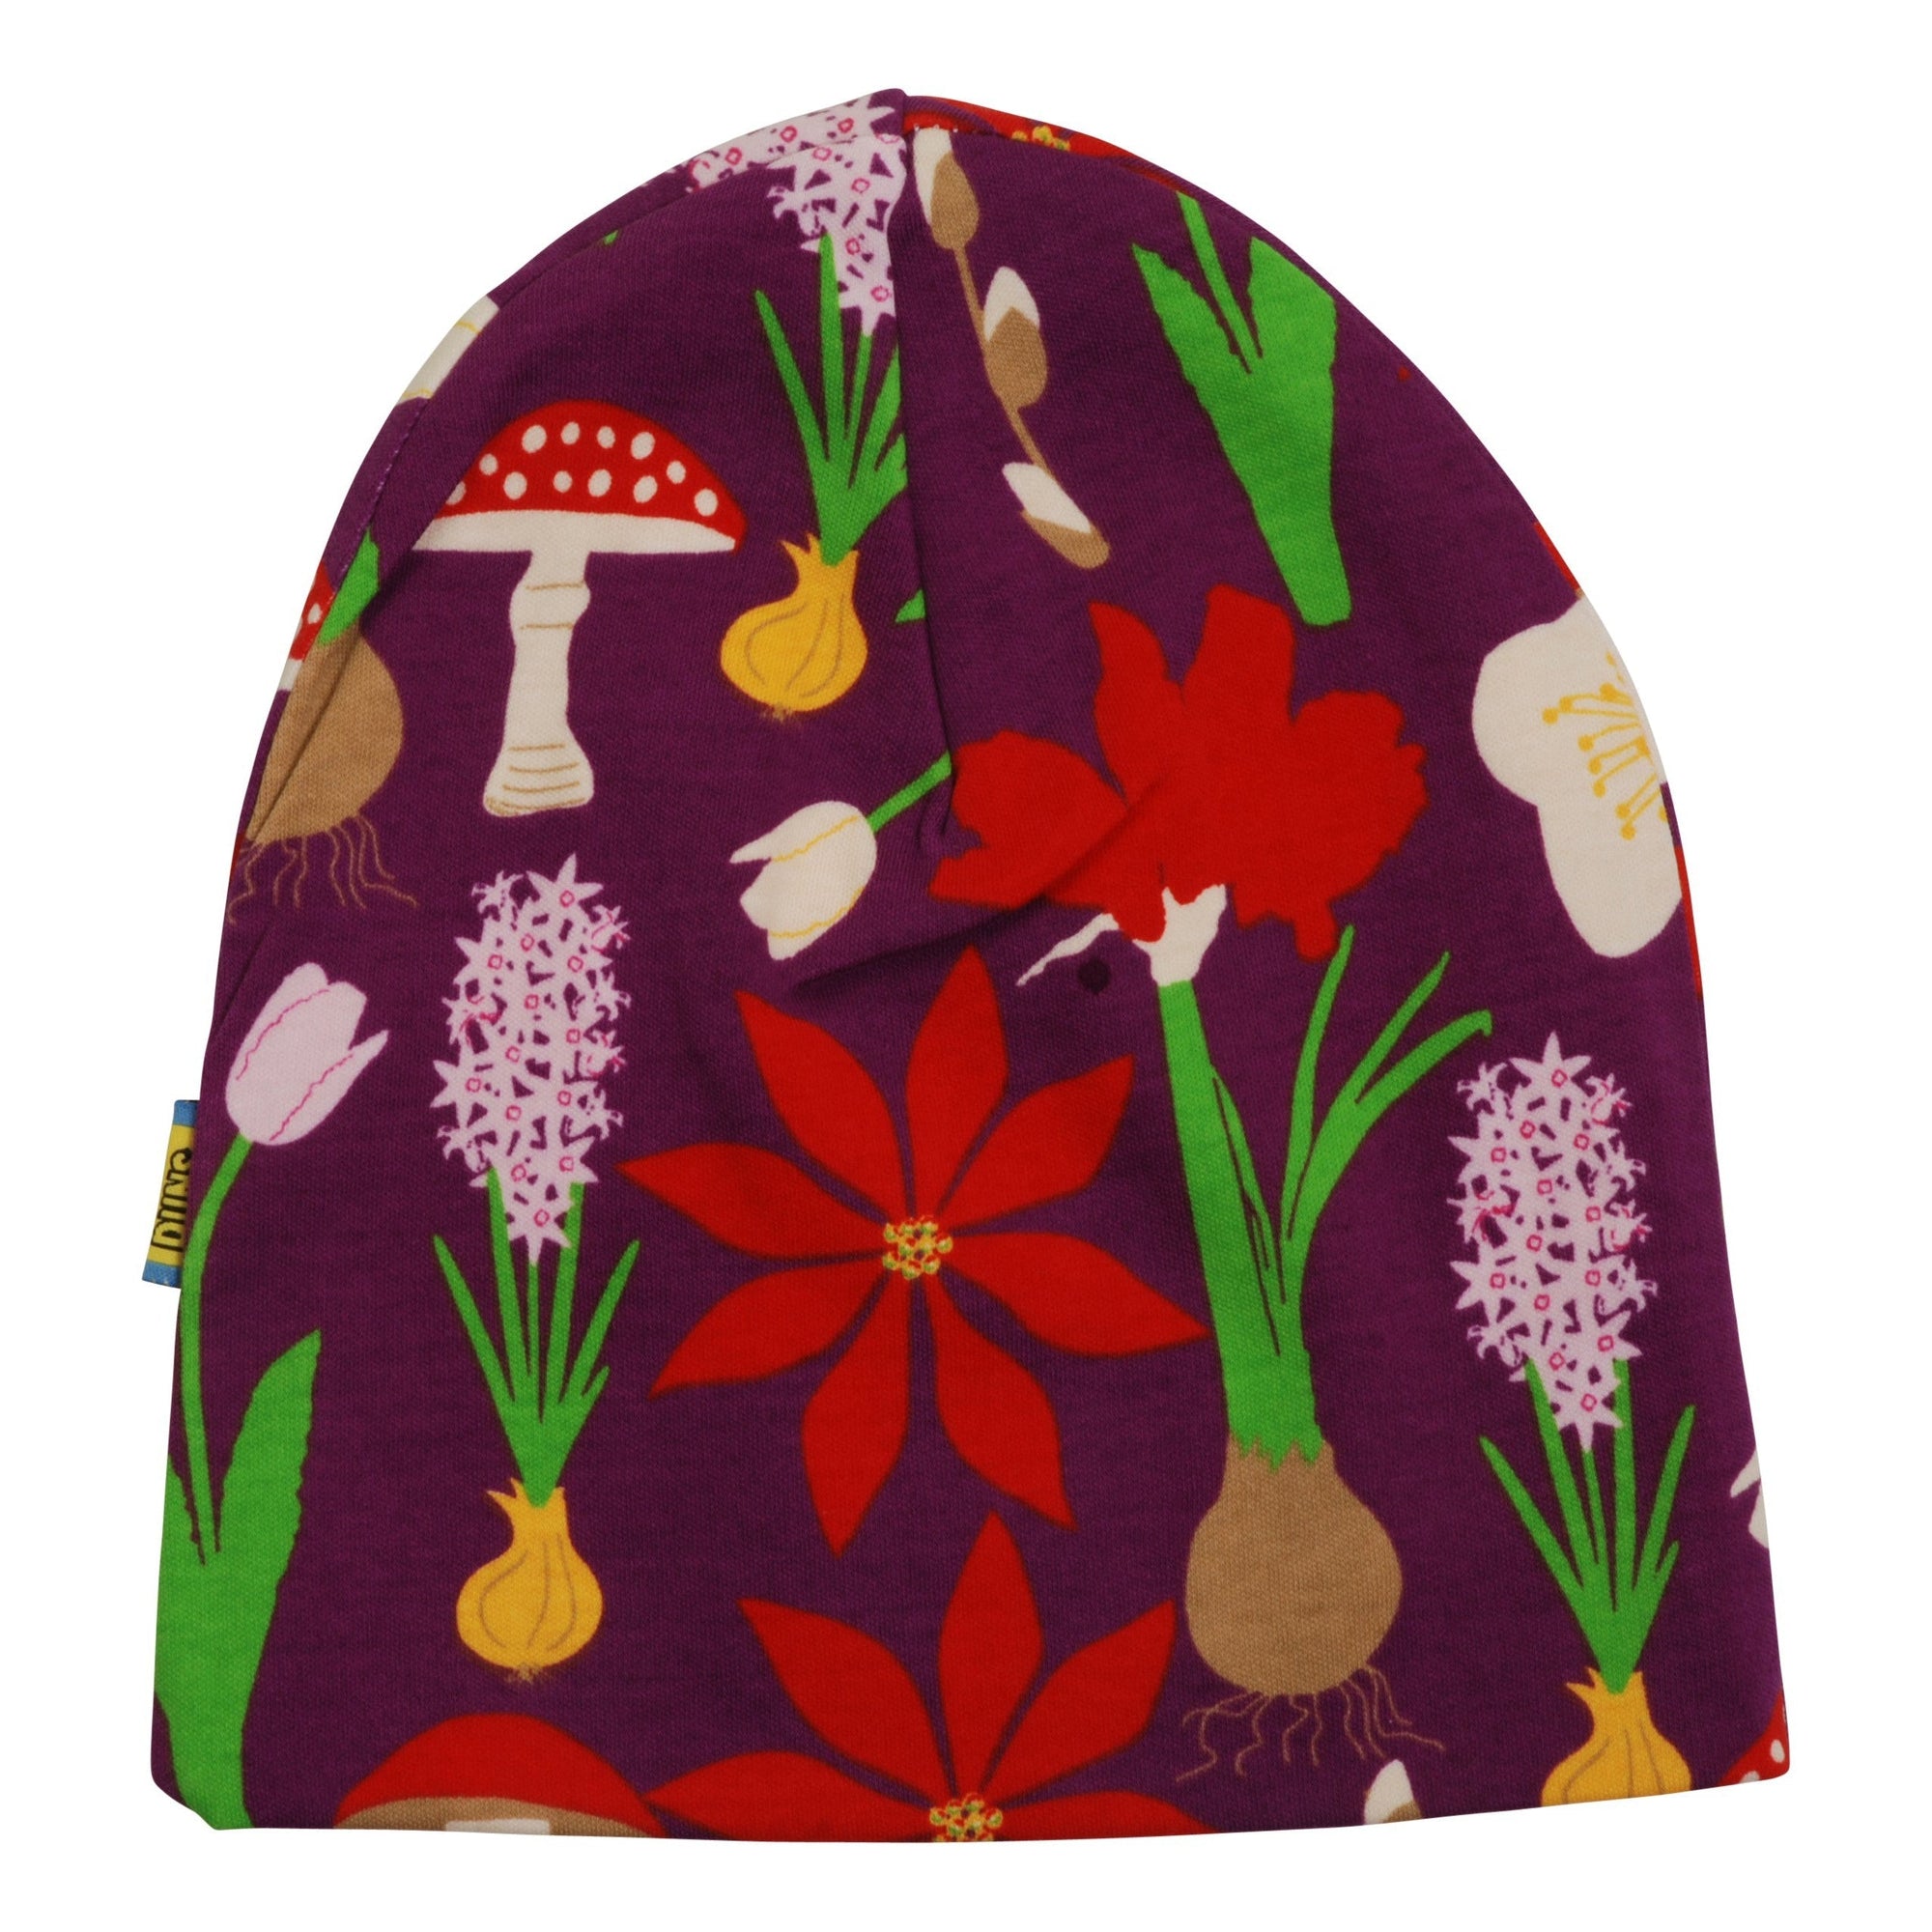 Winter Flowers Double Layer Hat - 2 Left Size 1-4 & 4-6 years-Duns Sweden-Modern Rascals